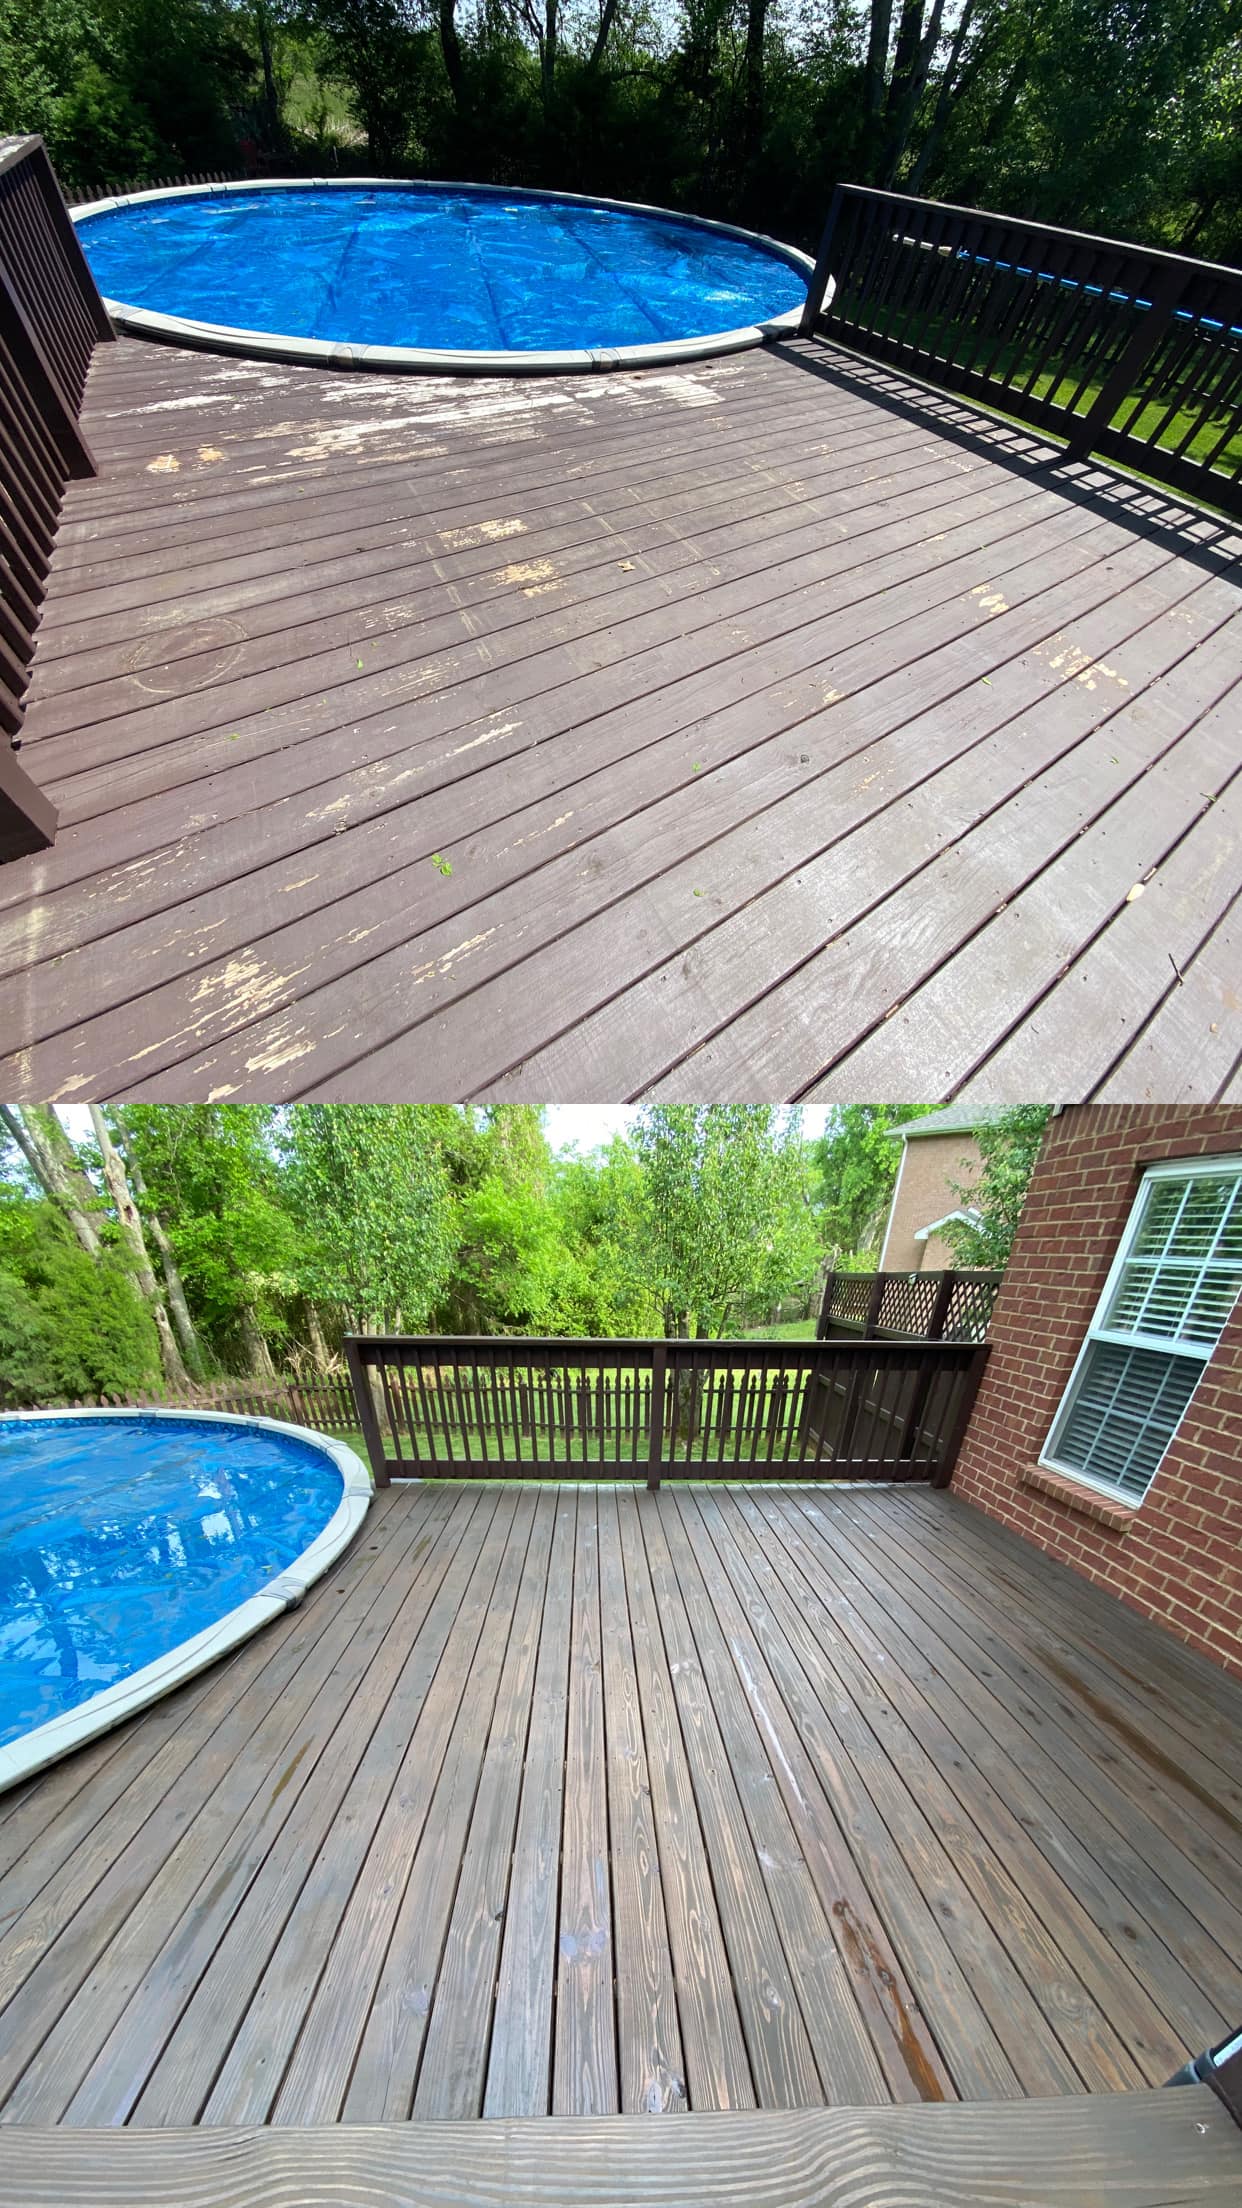 McCoy's Pressure Washing and Deck Staining - Brentwood, TN, US, pressure wash